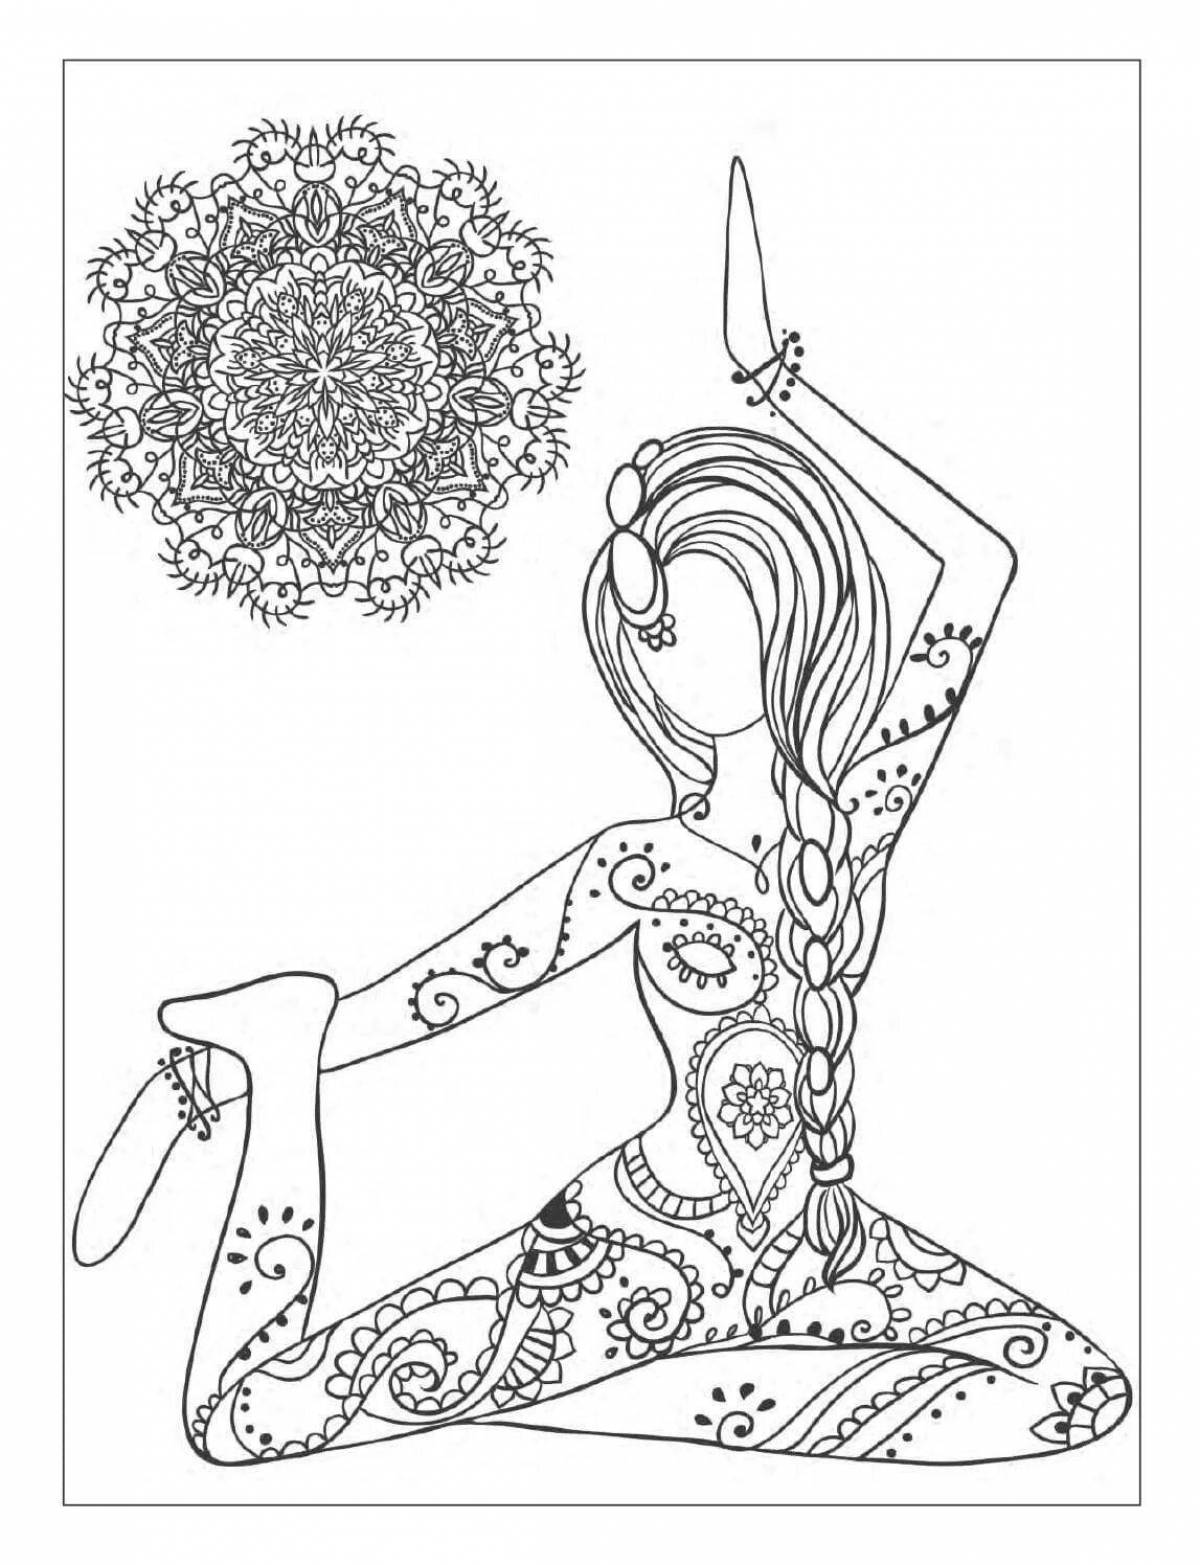 Relaxing coloring meditation page